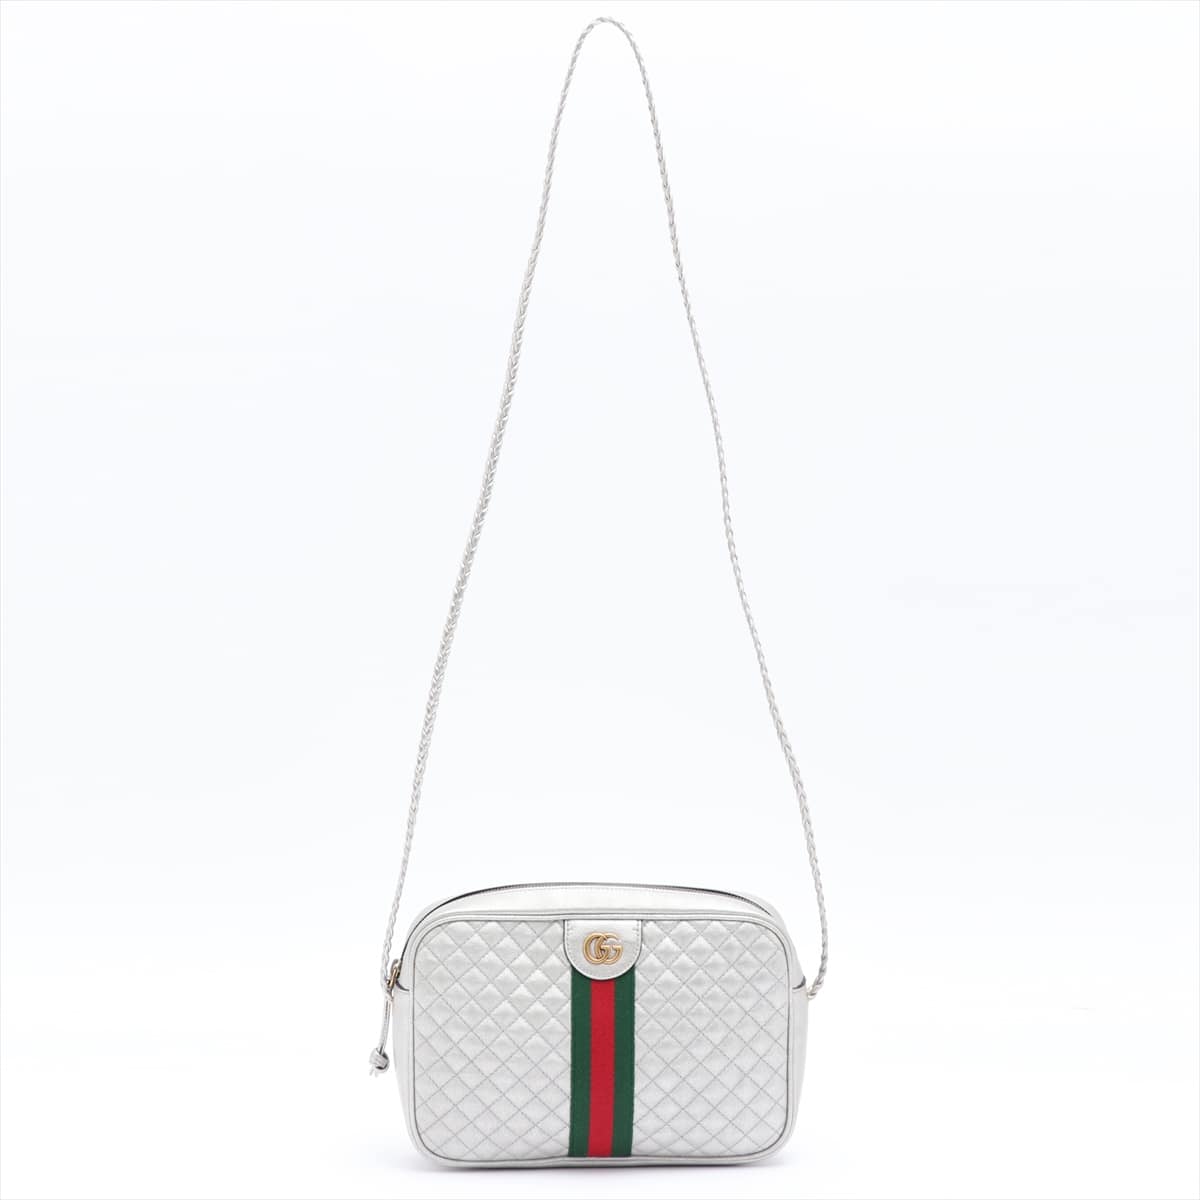 Gucci GG Marmont Leather Shoulder bag Silver 541051